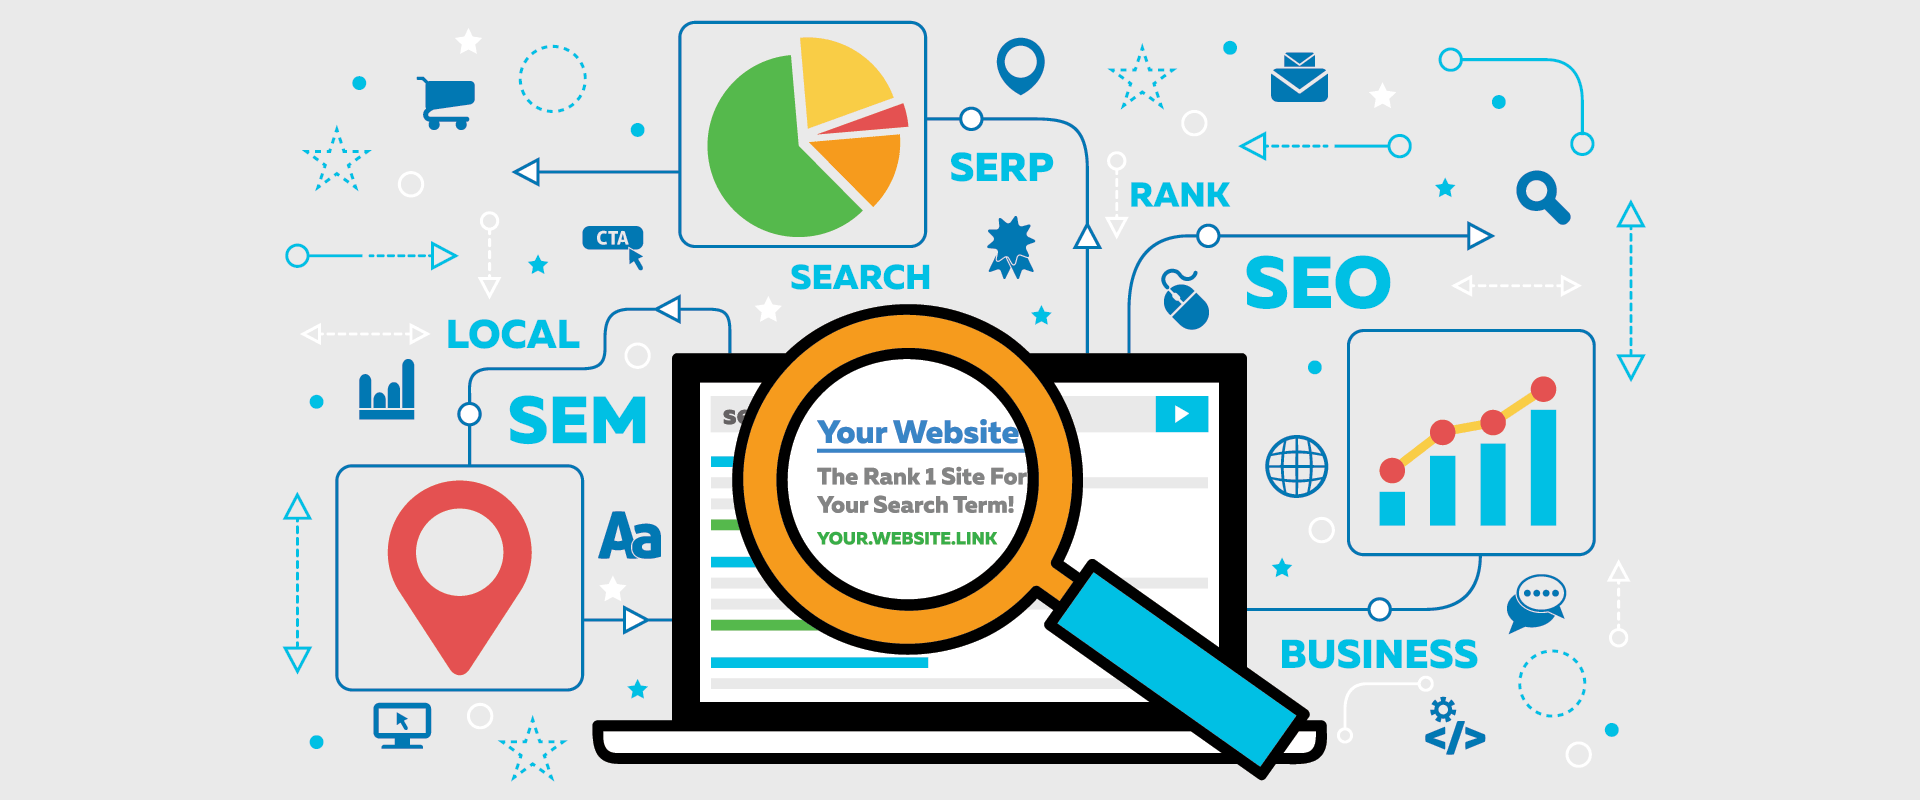 How SEO Plays An Important Role In Your Business?